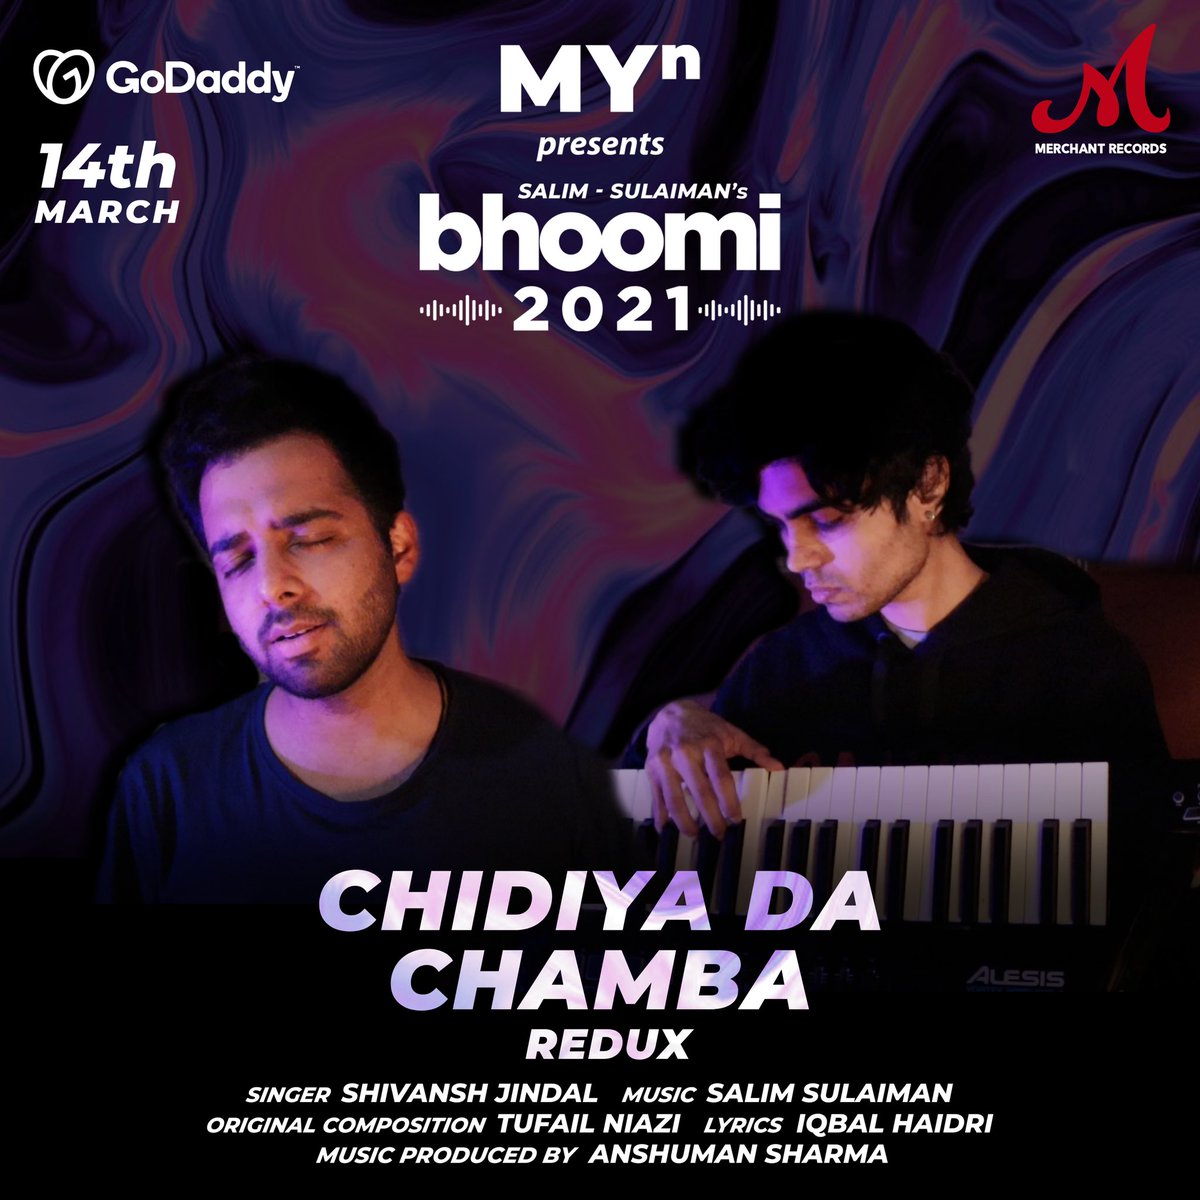 Bhoomi is a special album for me! Every year, there are so many beautiful compositions released under the #Bhoomi umbrella and #ChidiyaDaChamba is one of those which stayed with me.

Releasing a humble rendition, produced by @anshumonsharma tomorrow on @MerchantRec! ⭐️